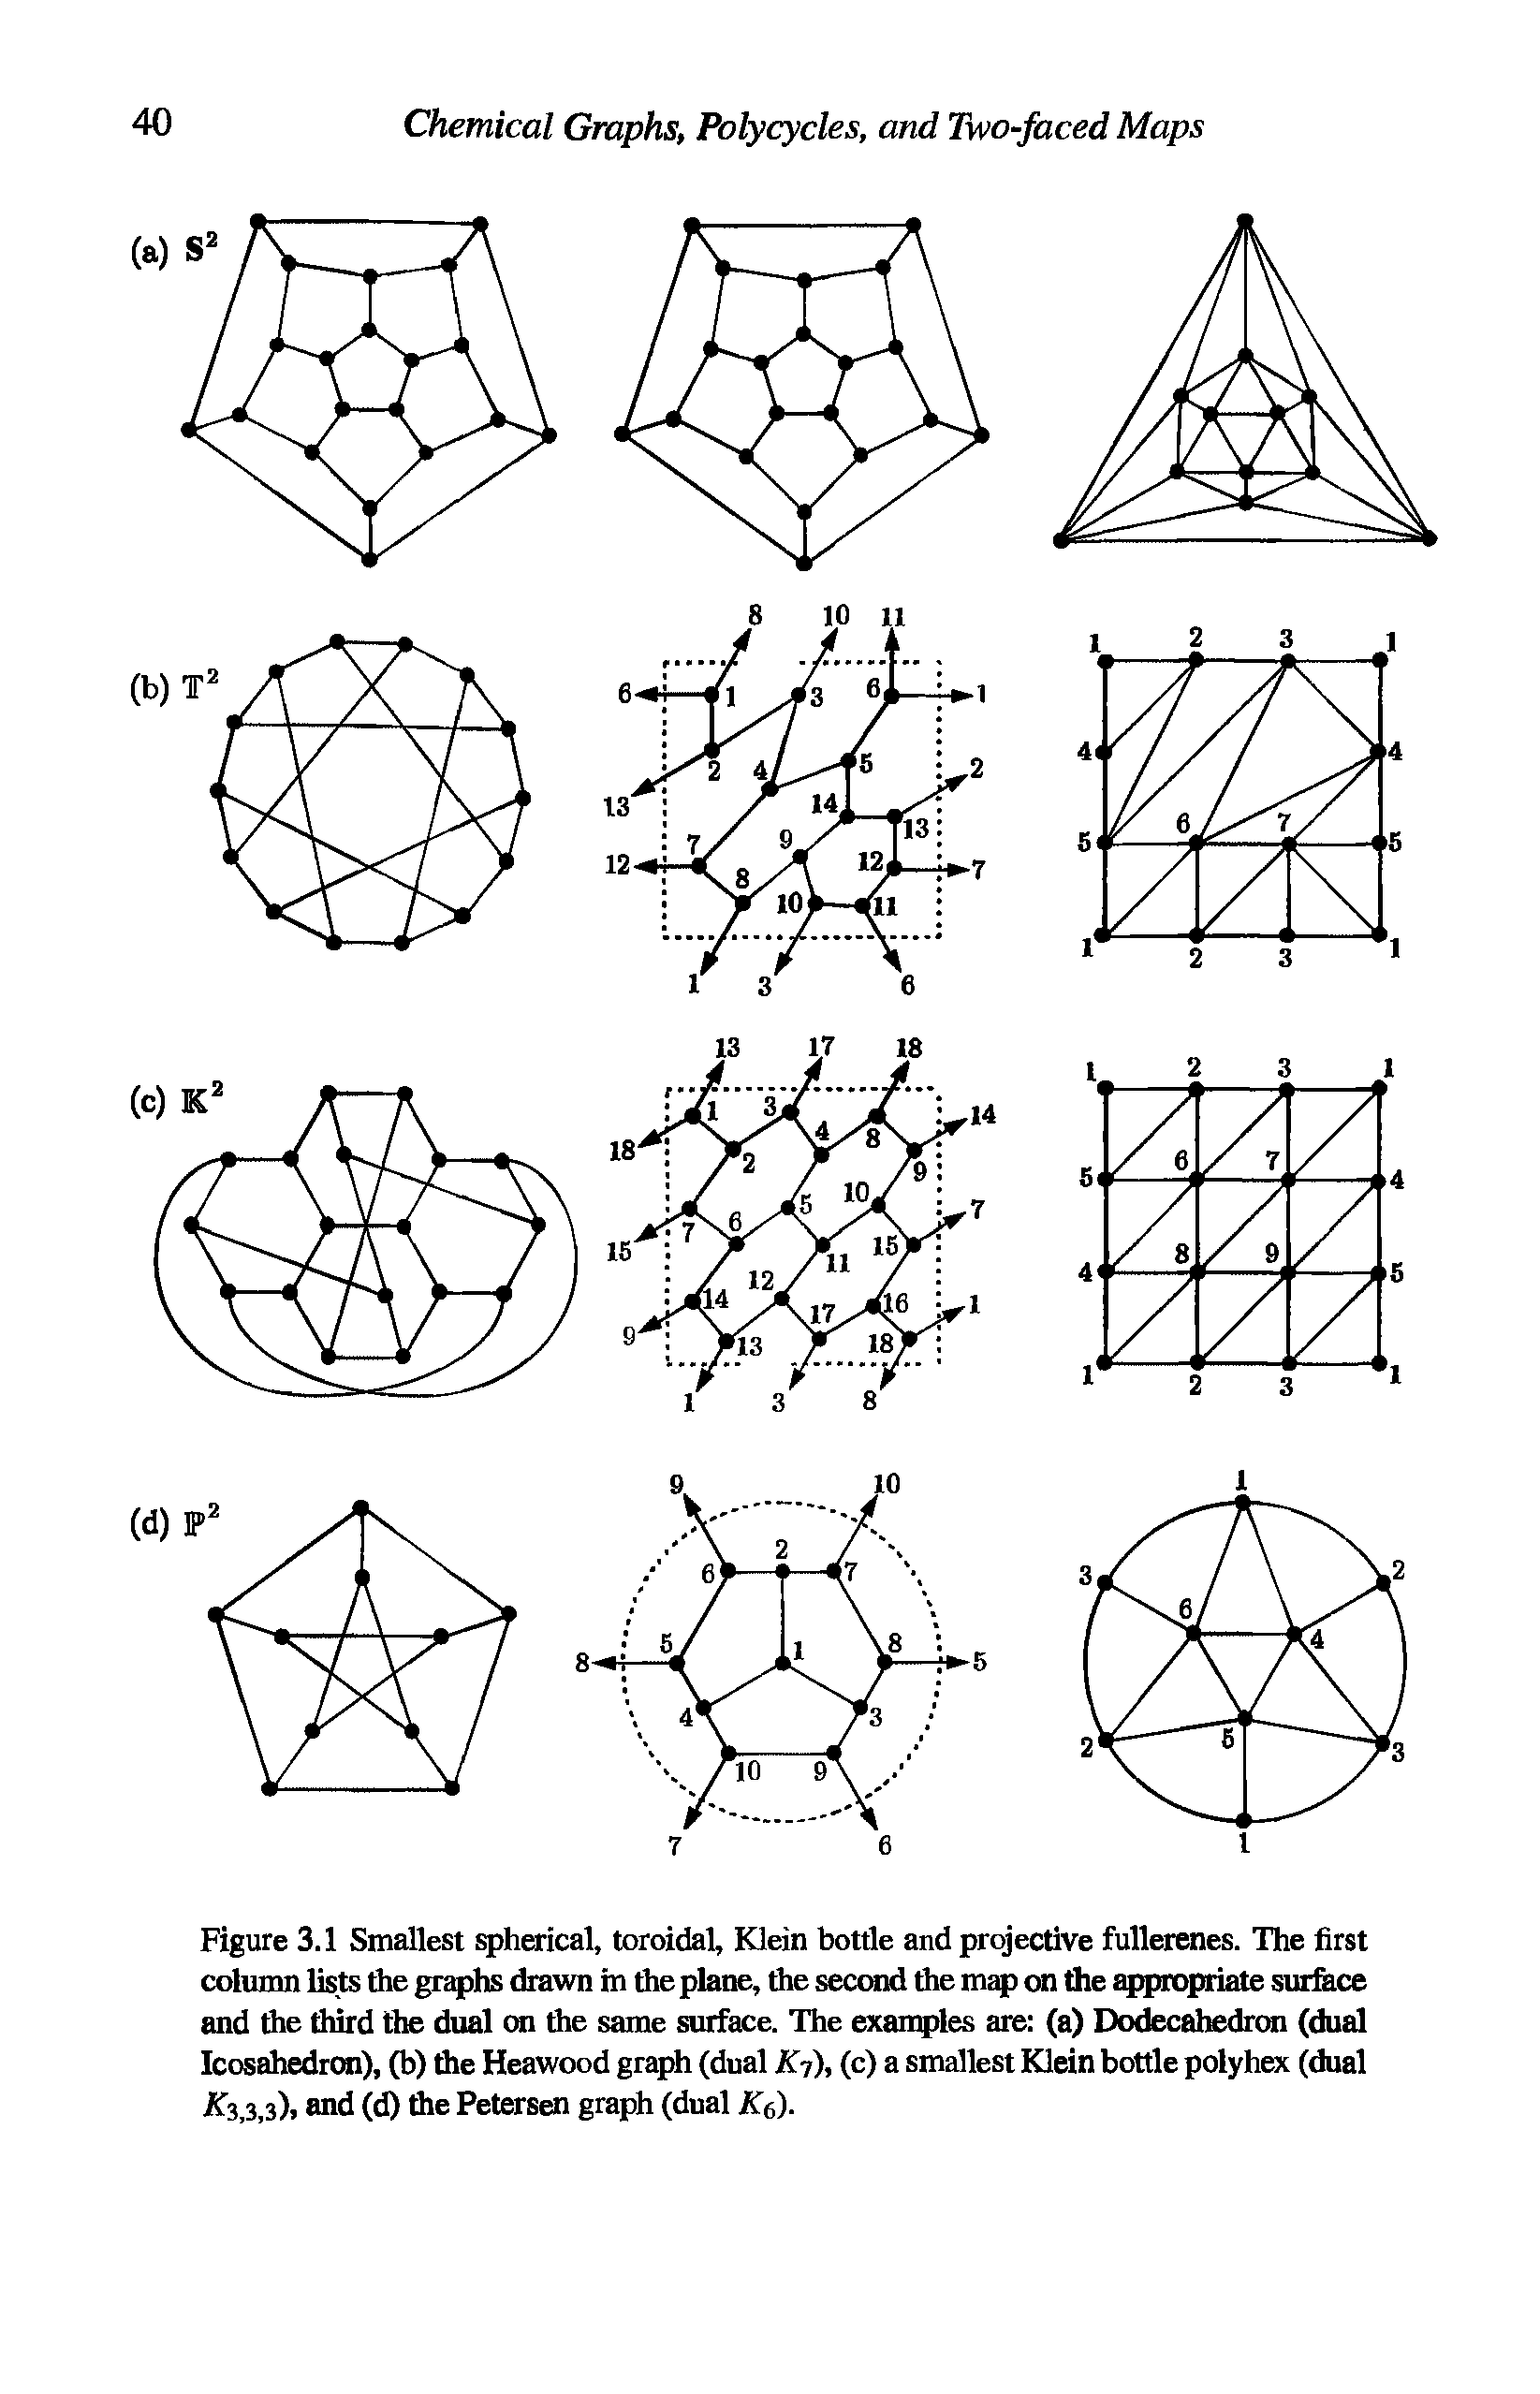 Figure 3.1 Smallest spherical, toroidal, Klein bottle and projective fullerenes. The first column lists the graphs drawn m the plane, the second the map on the appropriate surface and the third the dual on the same surface. The examples are (a) Dodecahedron (dual Icosahedron), (b) the Heawood graph (dual Ky), (c) a smallest Klein bottle polyhex (dual 3,3,3), and (d) the Petersen graph (dual Ke).